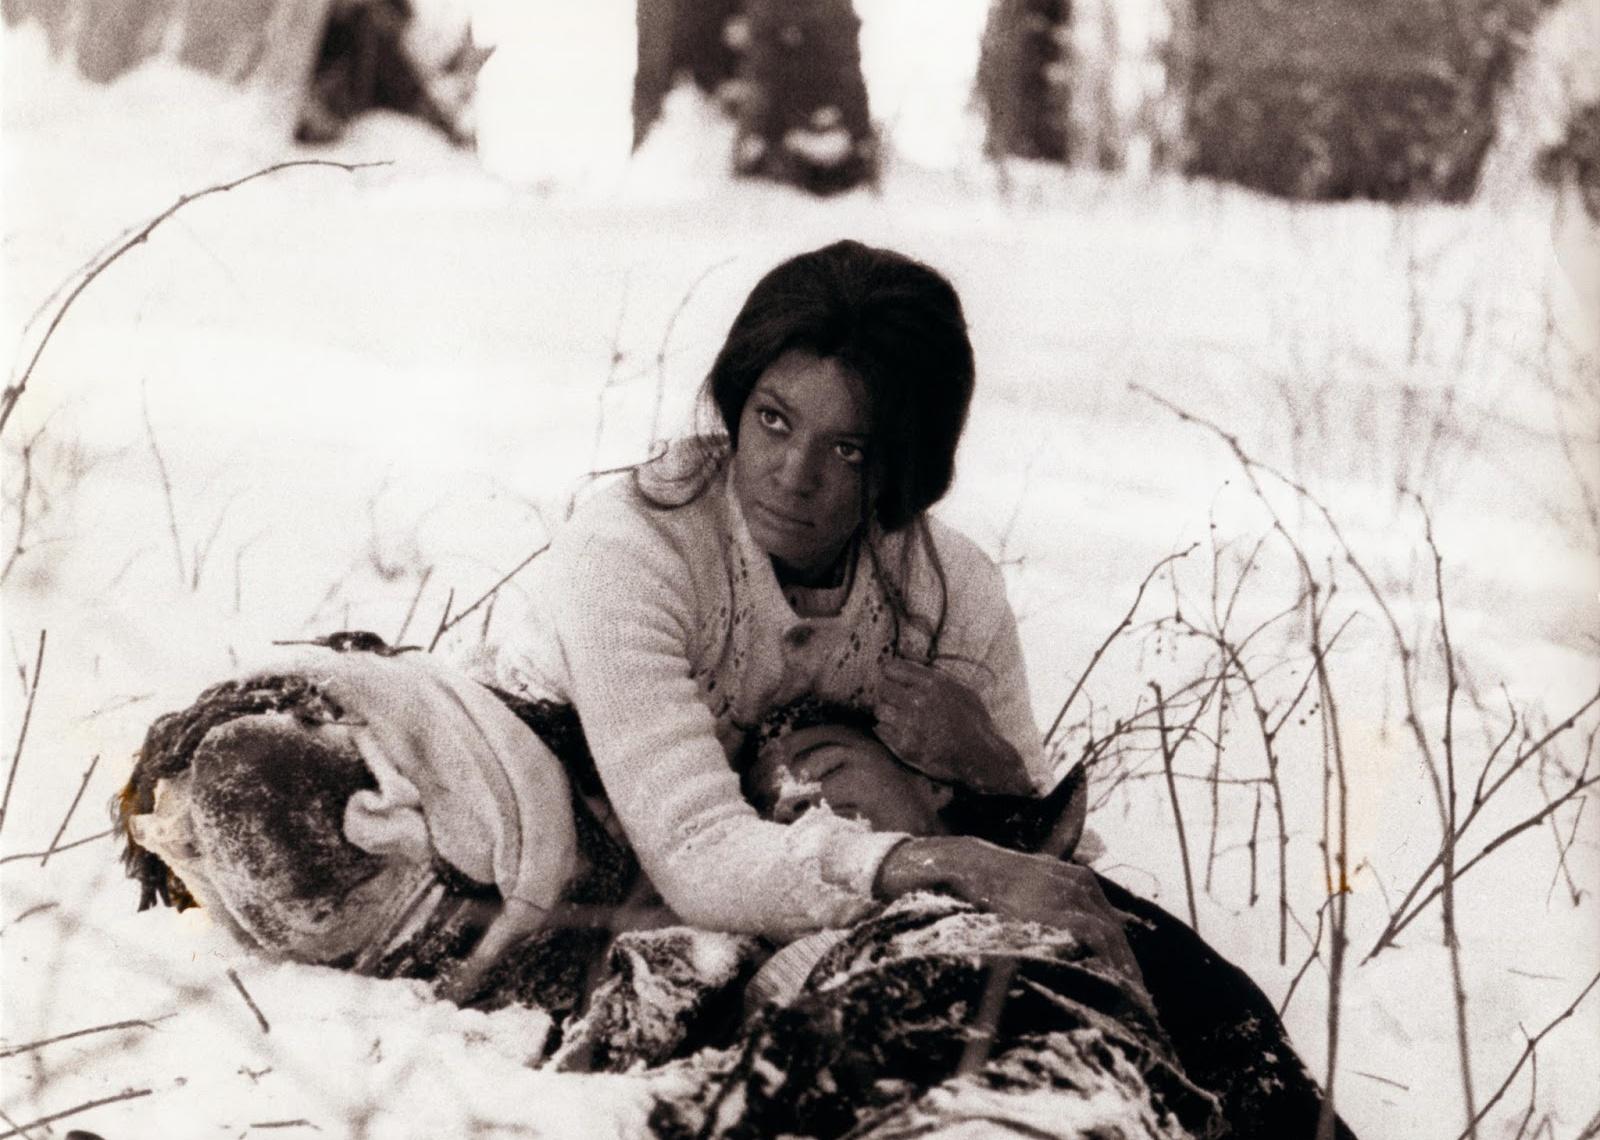 A woman clings to a man lying in the snow.